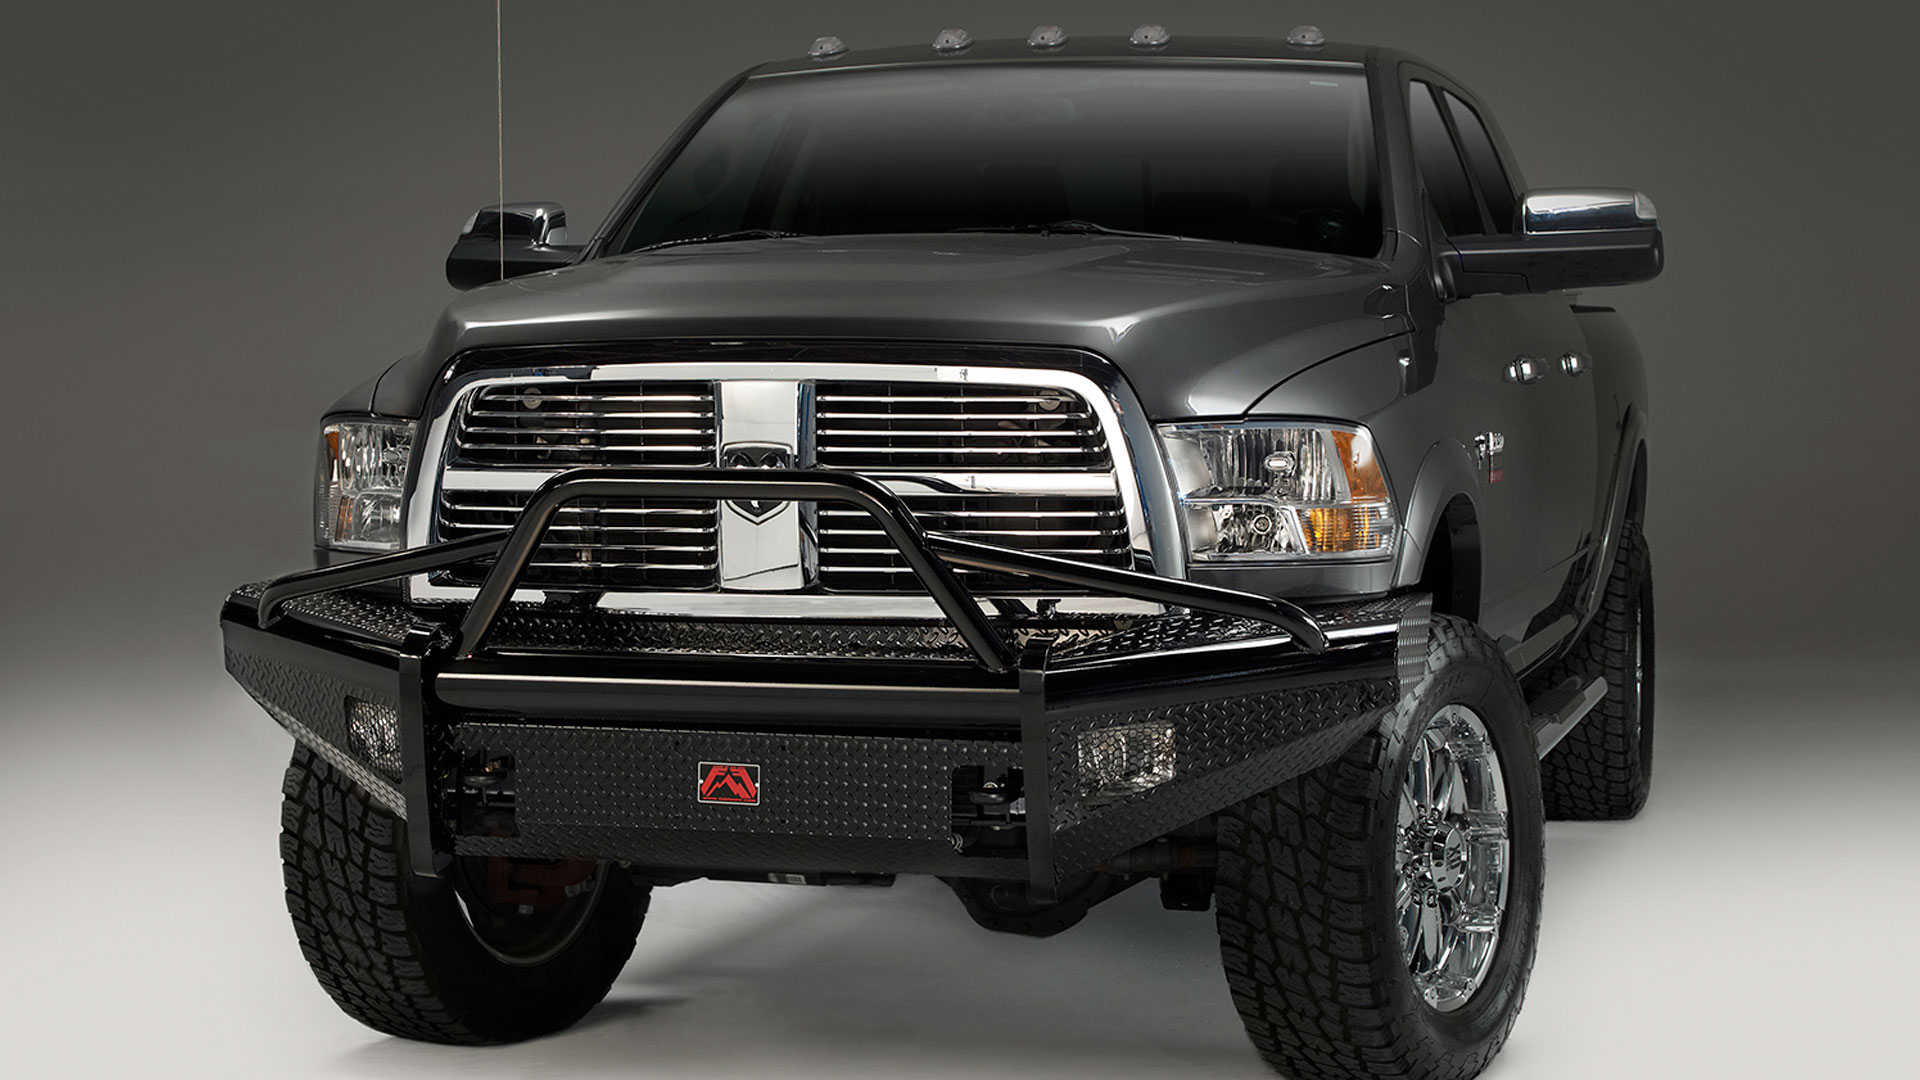 Premium Bumpers and Truck Accessories.